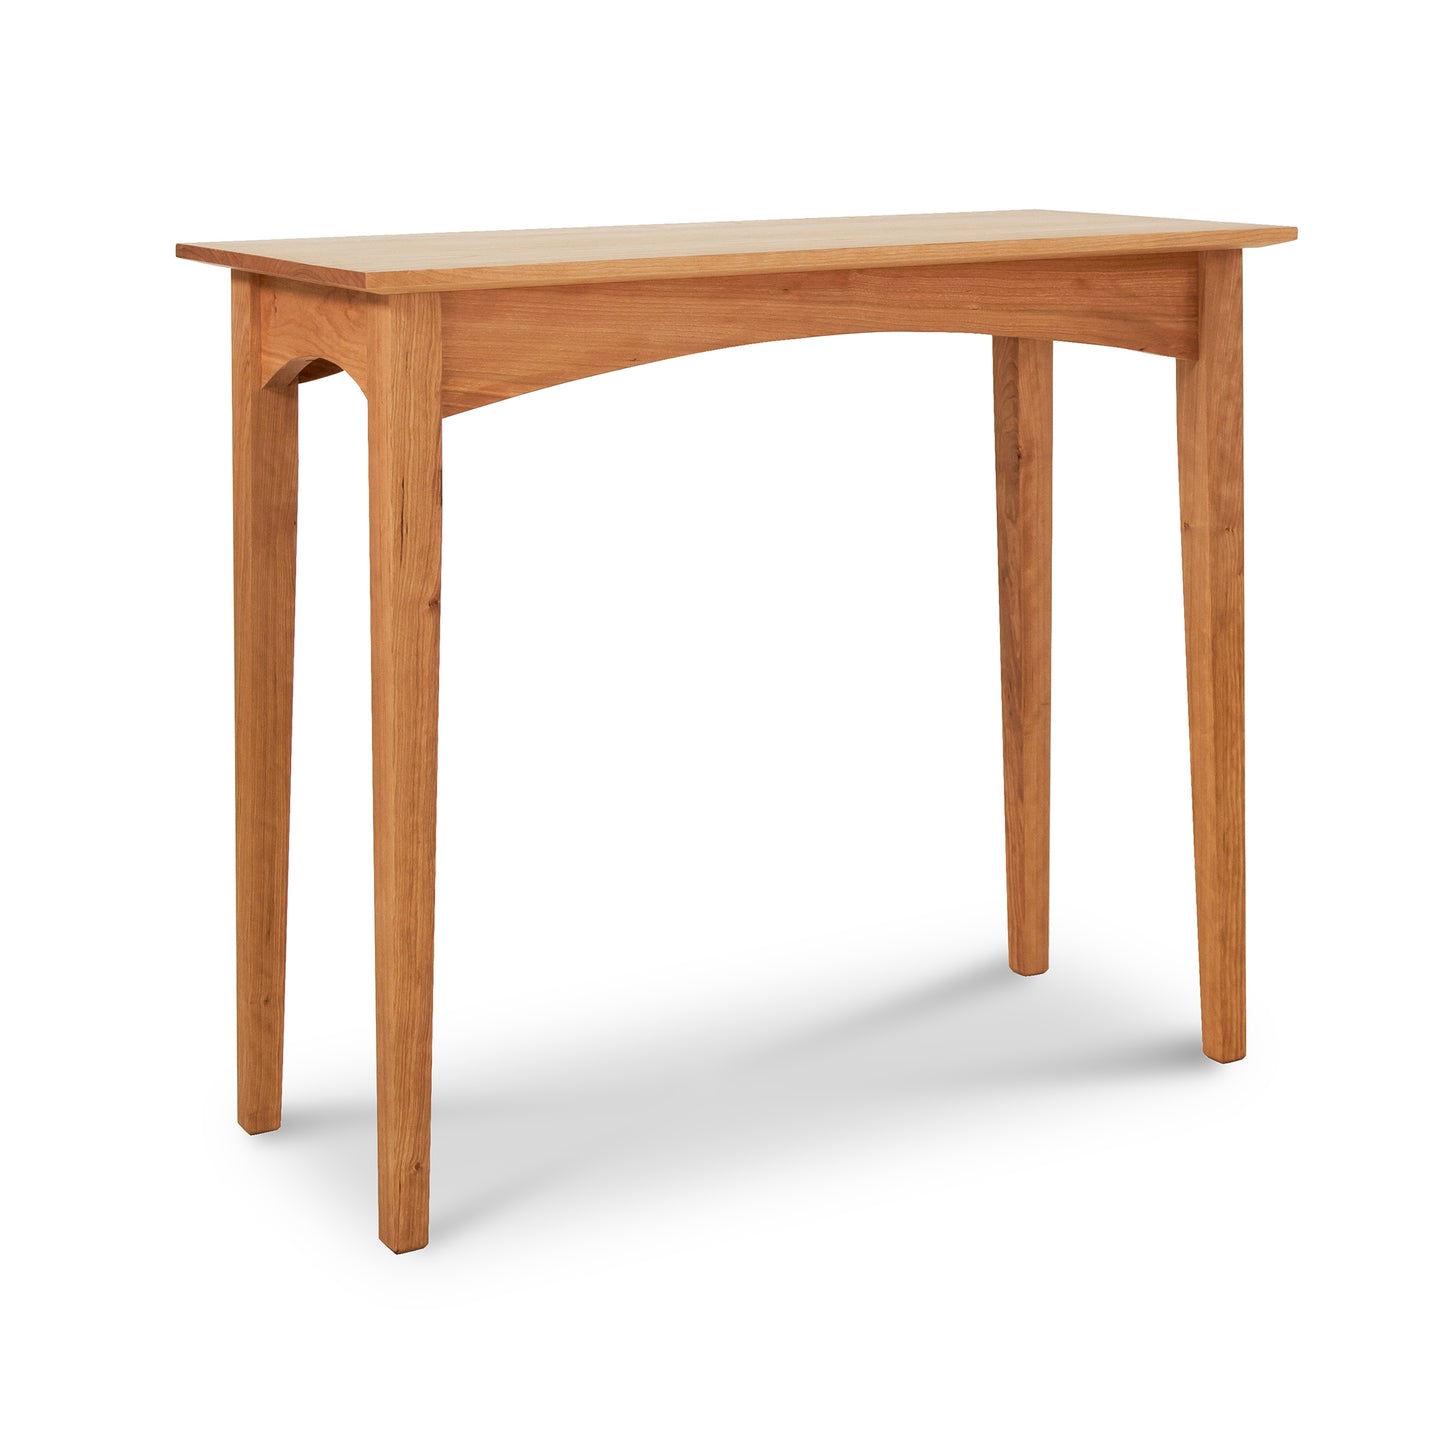 Maple Corner Woodworks American Shaker Sofa Table isolated on a white background.